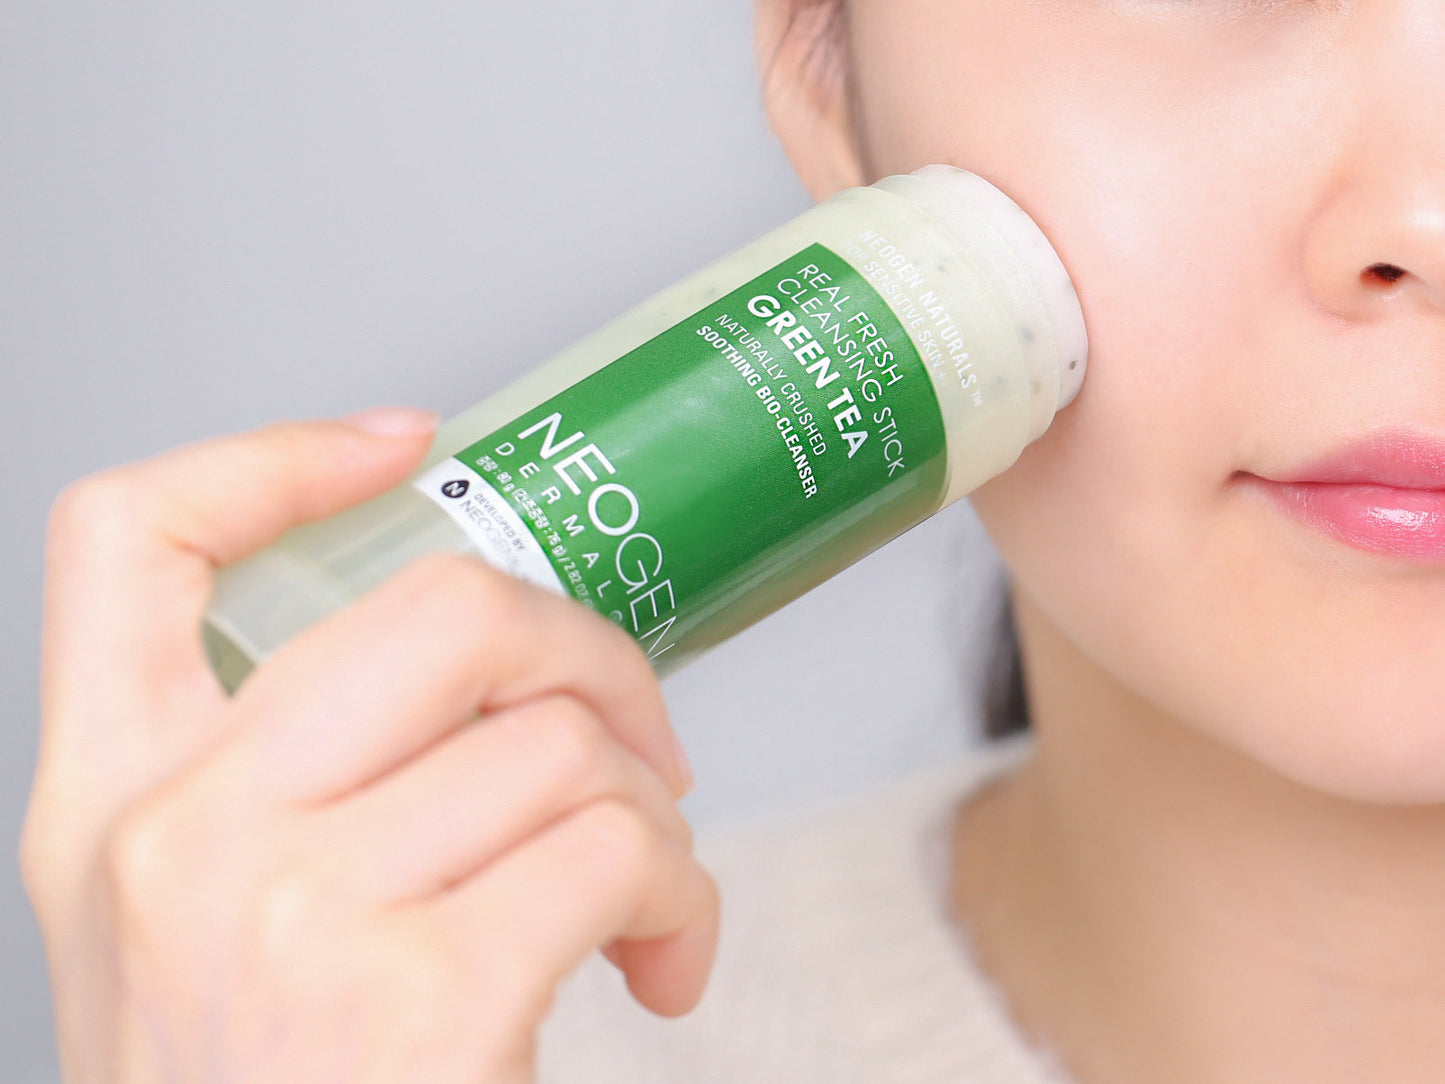 Real Fresh Cleansing Stick Green Tea 80g - La Cosmetique